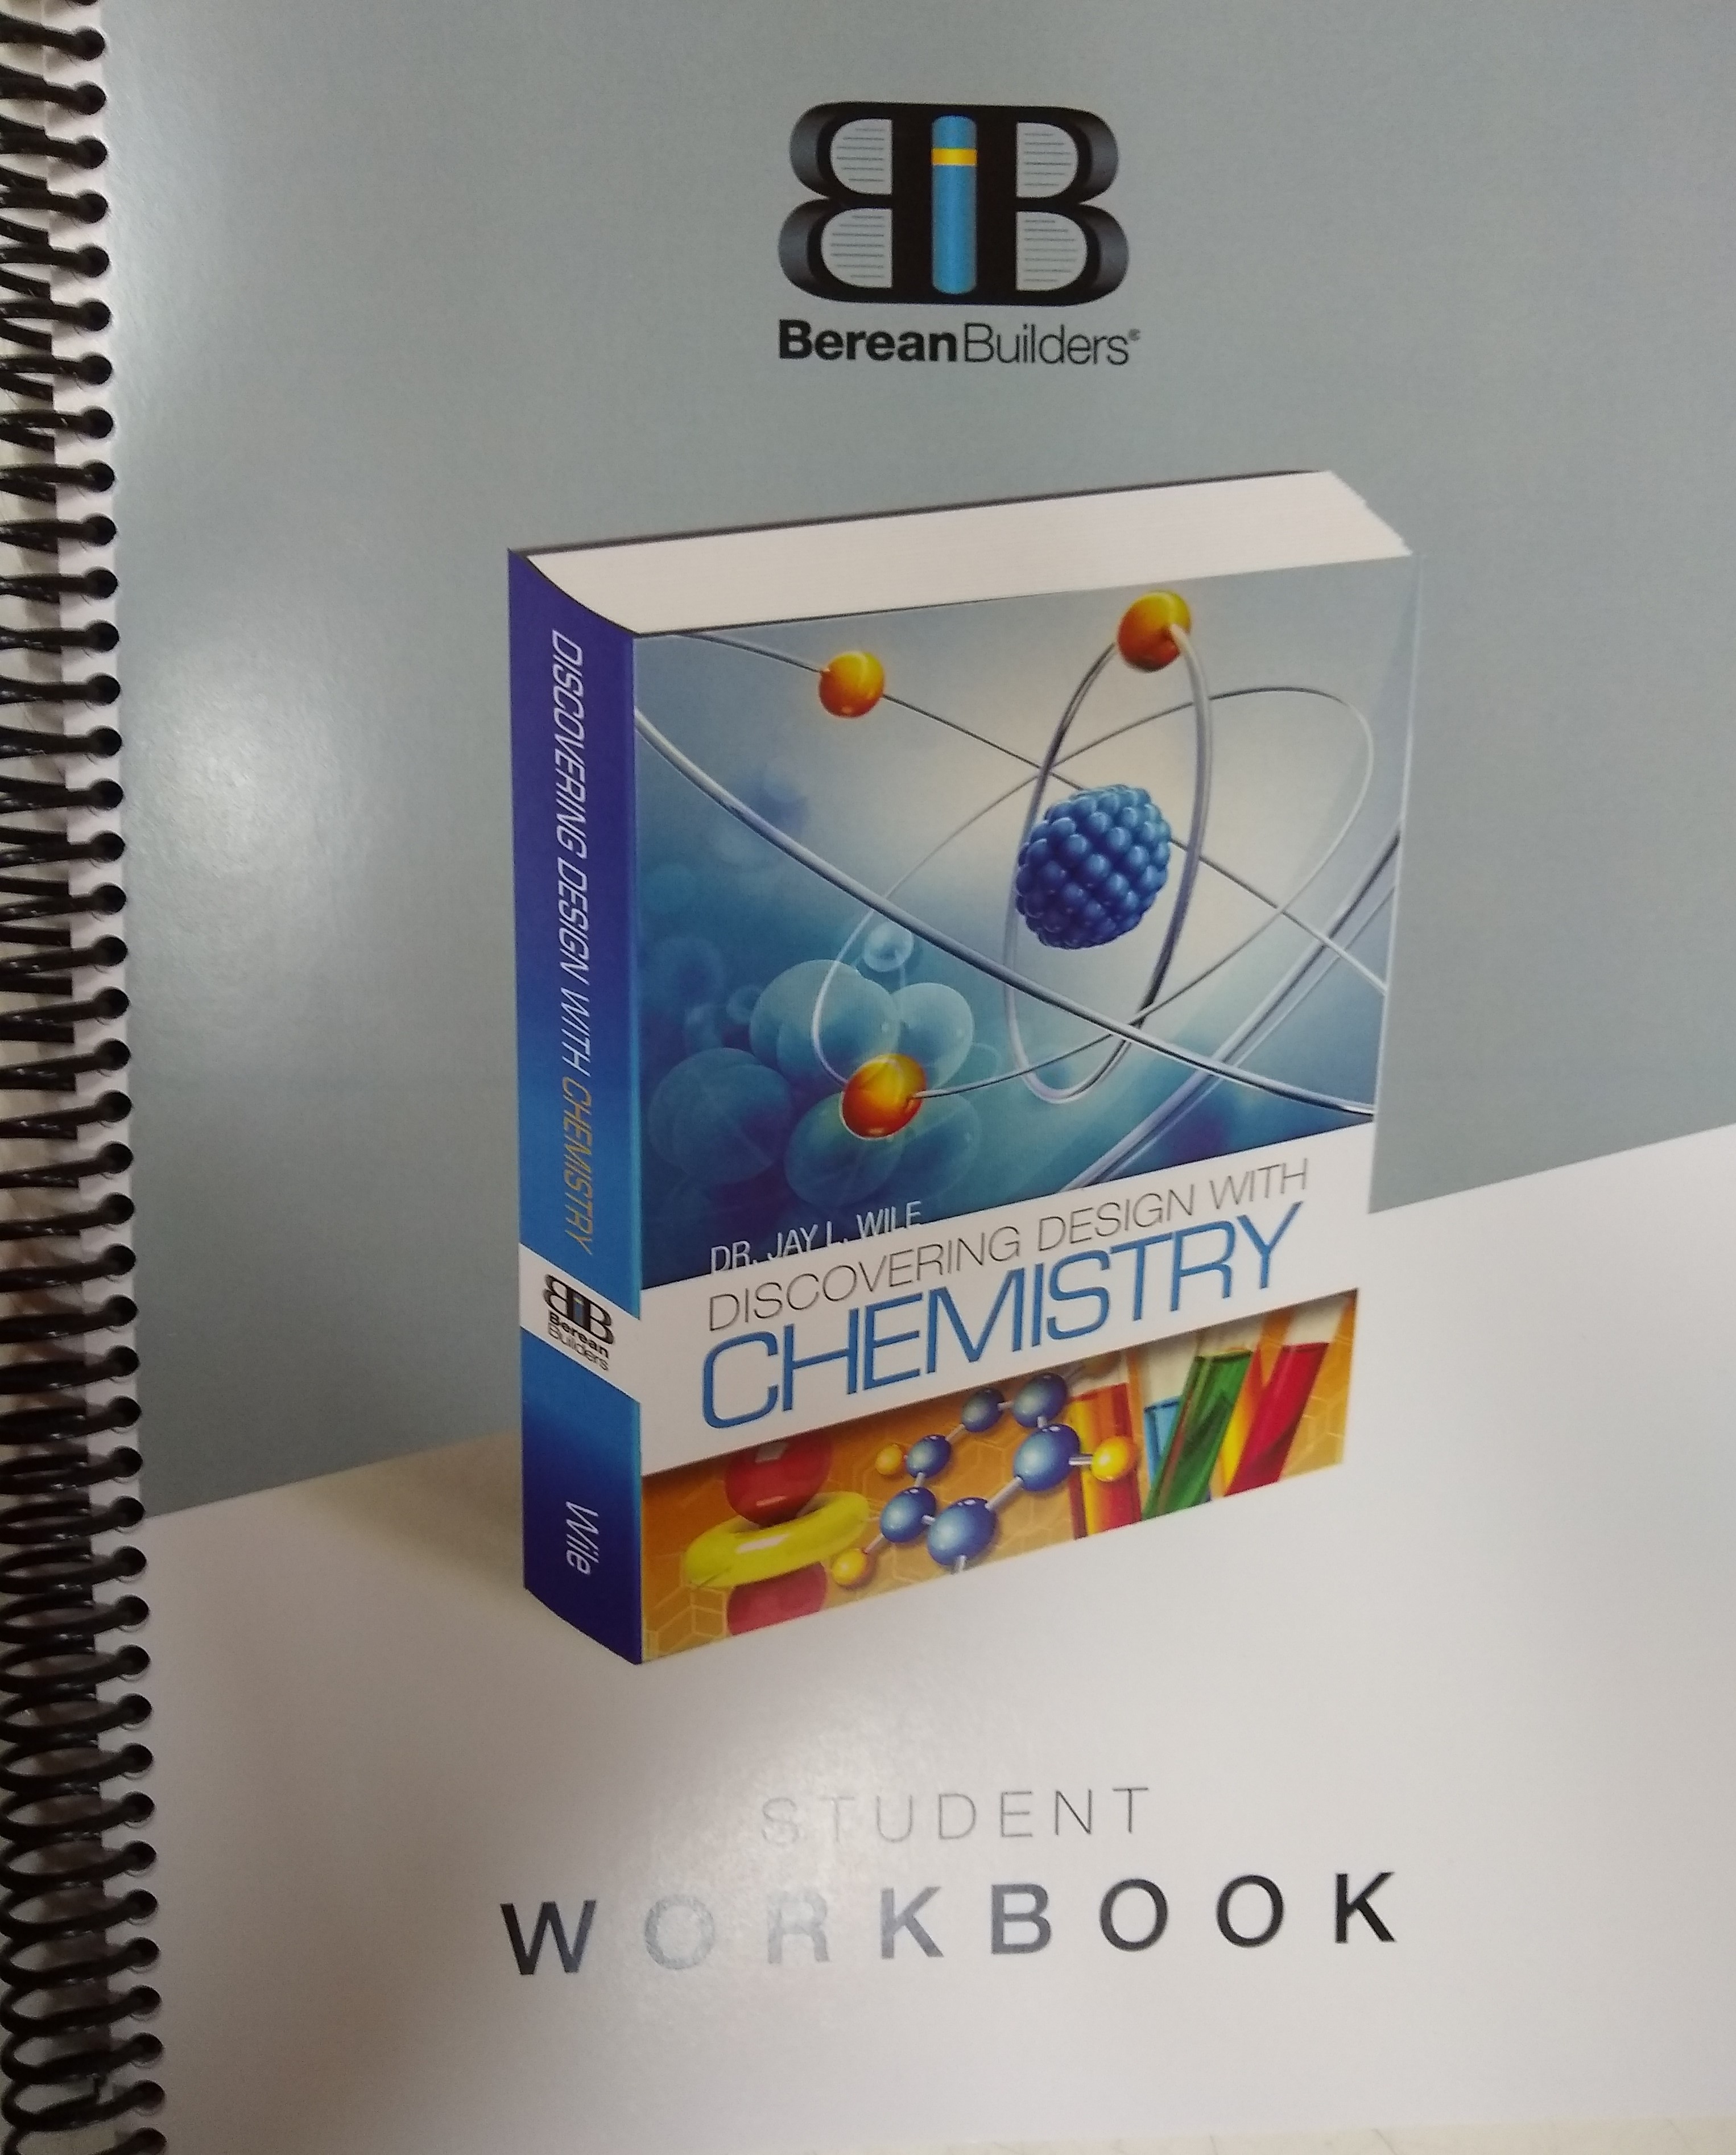 Discovering Design with Chemistry Workbook